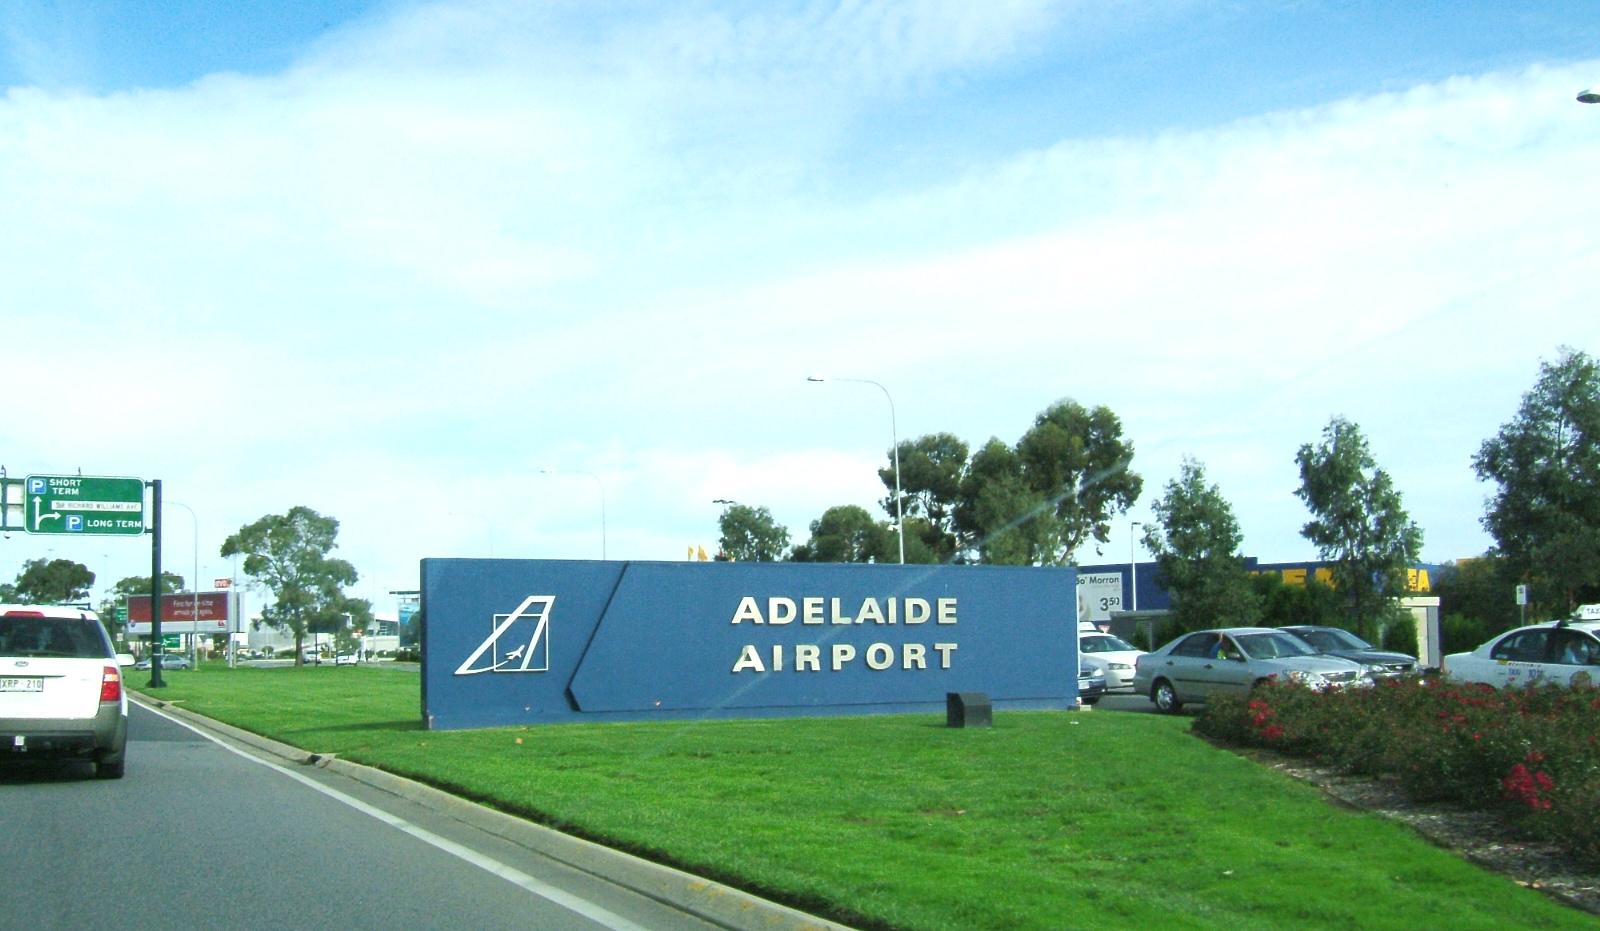 Adelaide Airport is the main international airport serving Adelaide and South Australia.